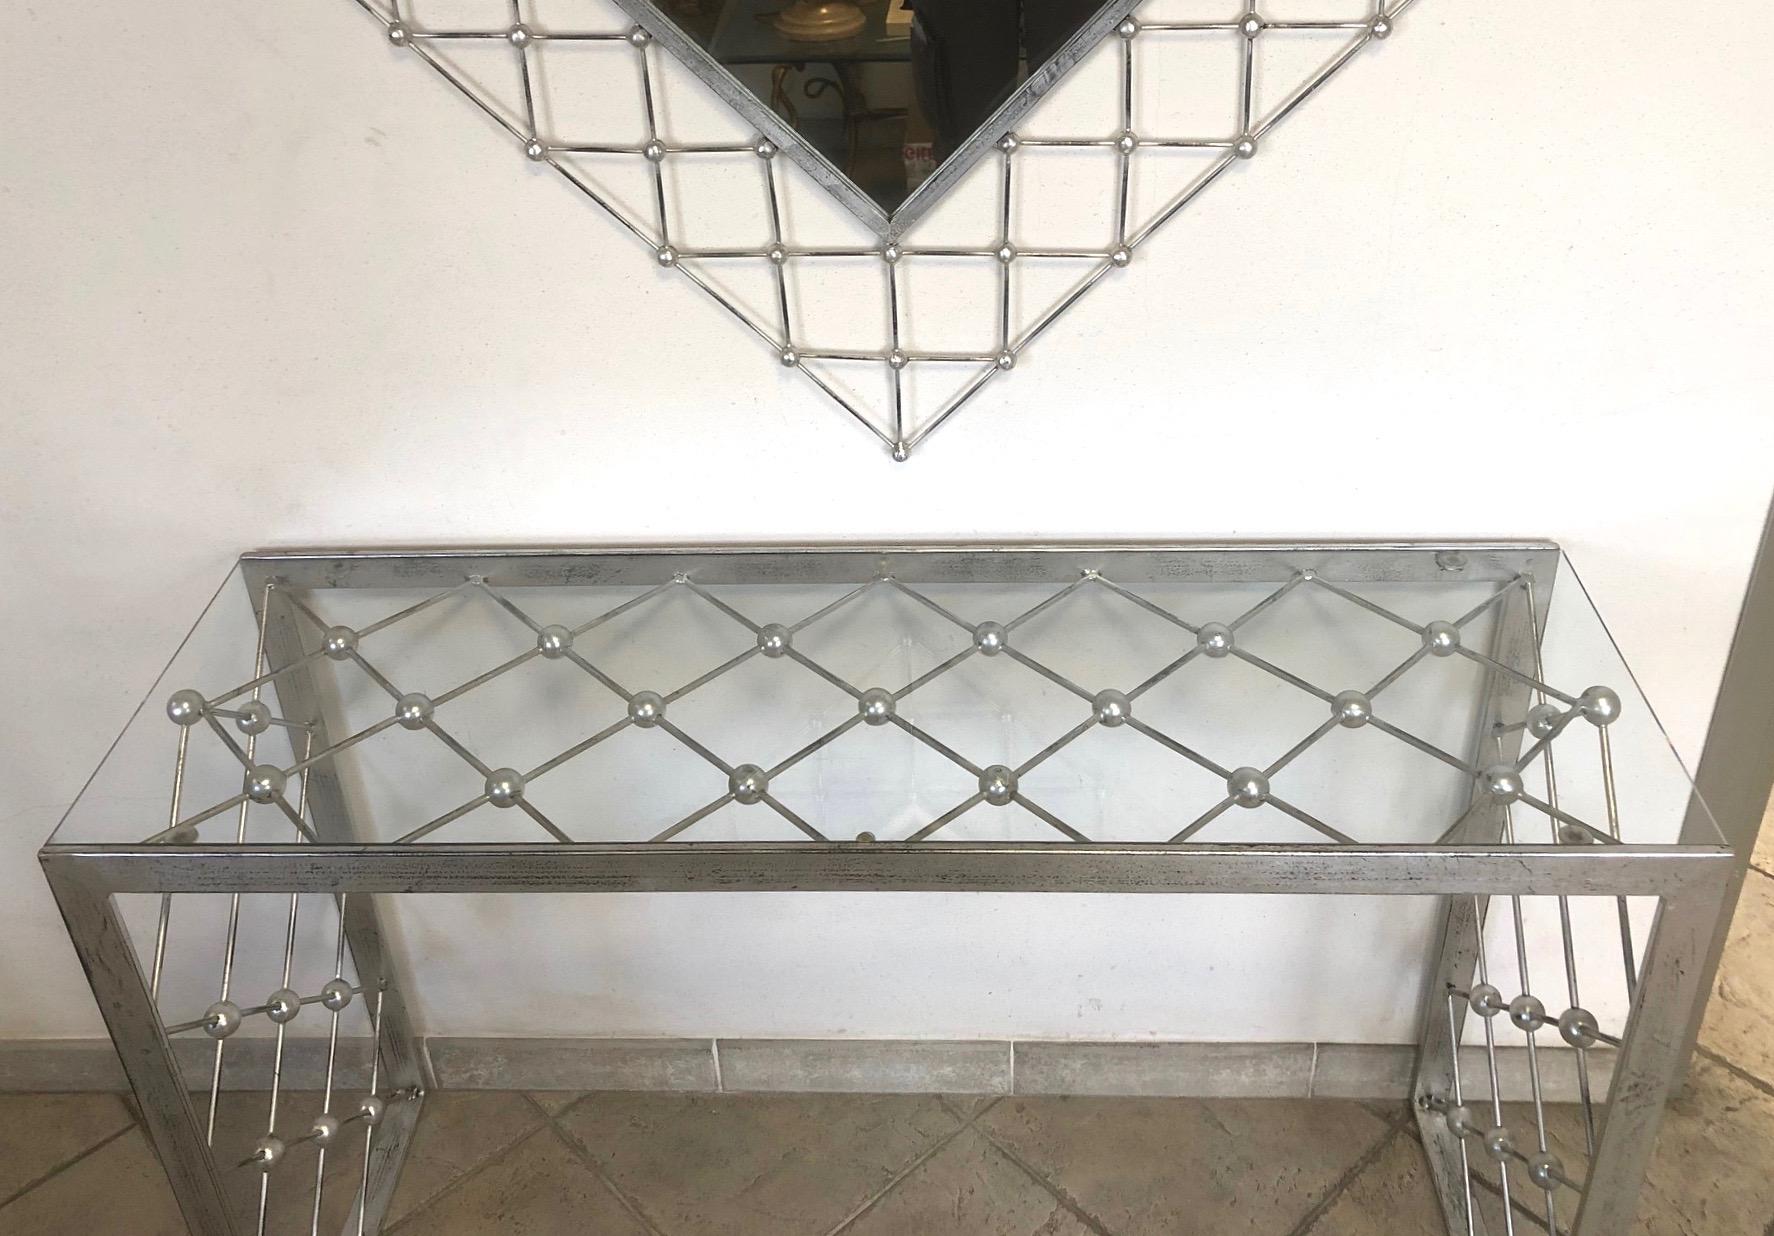 Brutalist Italian Modern Industrial Design Criss Cross Fretwork Iron Console / Entry Table For Sale